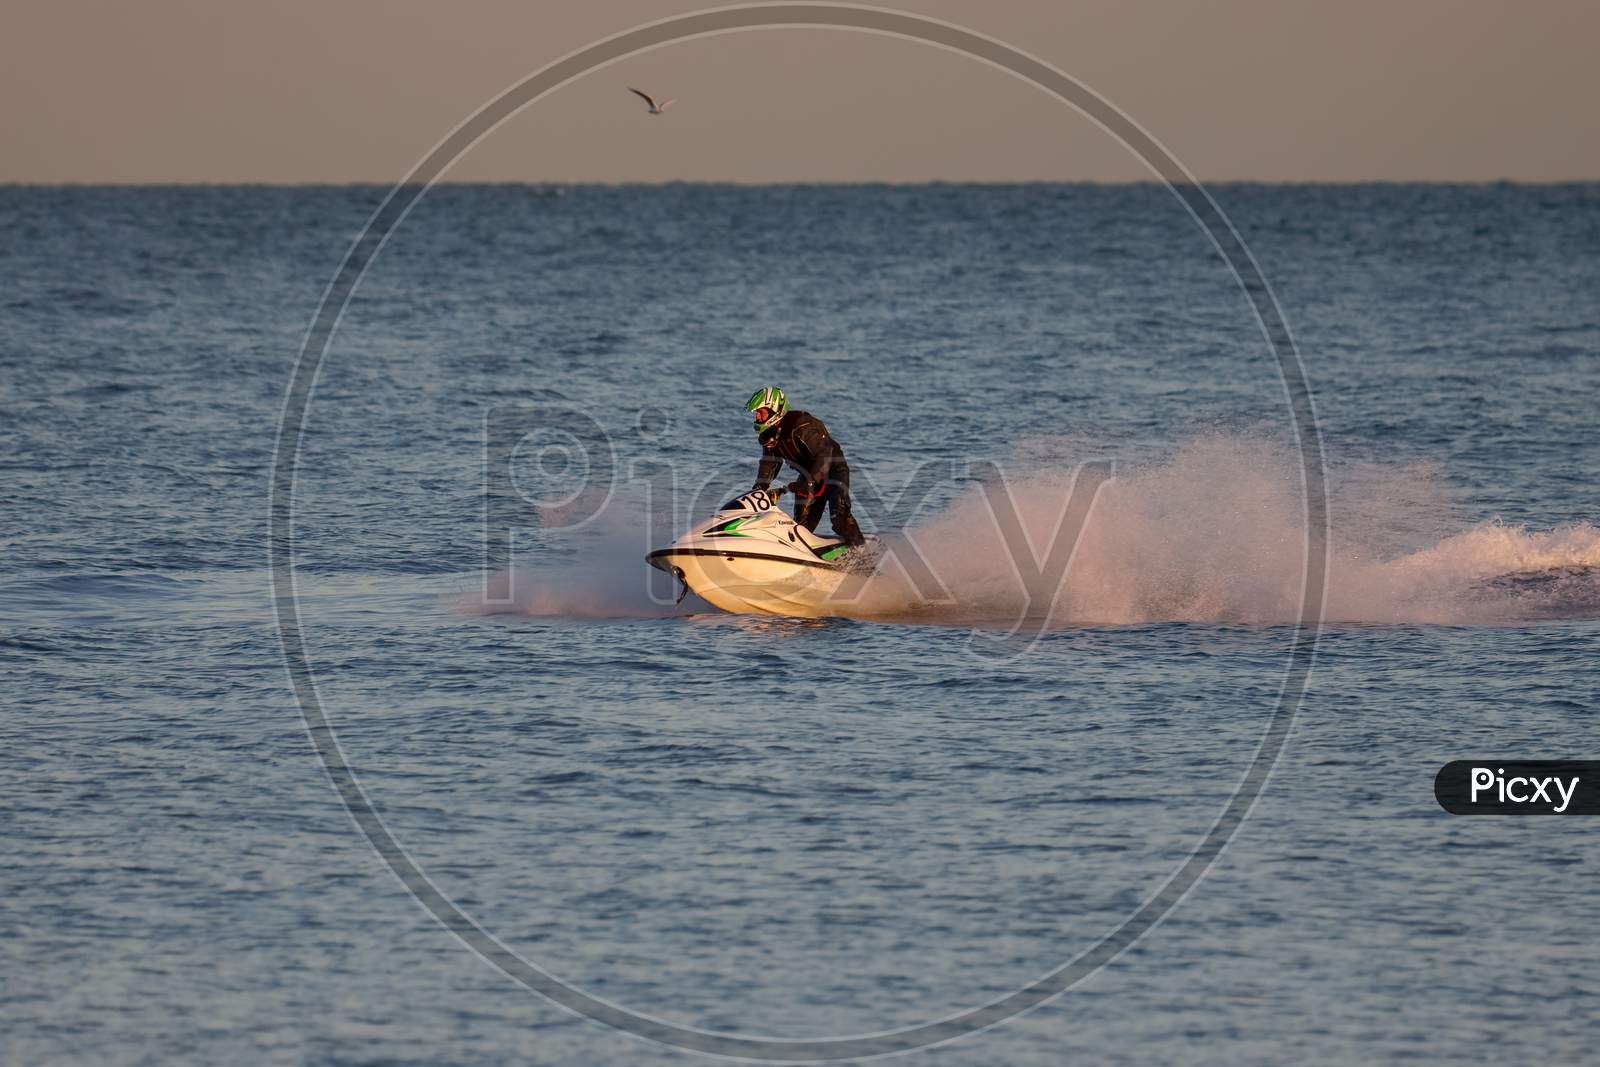 Dungeness, Kent/Uk - December 17 : Man Riding A Jet Ski Off Dungeness Beach In Kent On December 17, 2008. One Unidentified Person